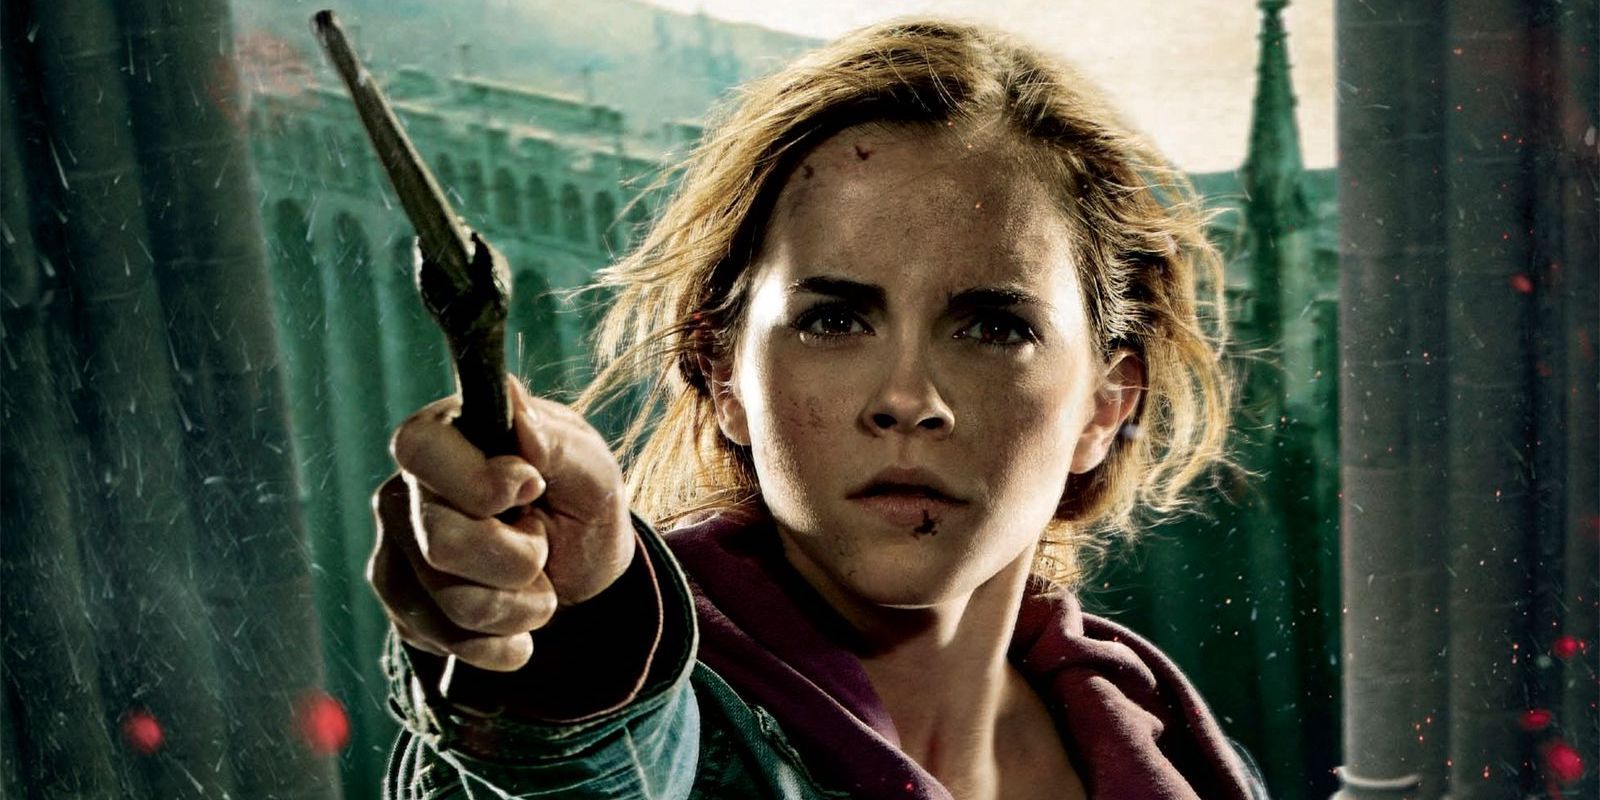 Emma Watsone as Hermoine Granger in Harry Potter and the Deathly Hallows Part 2